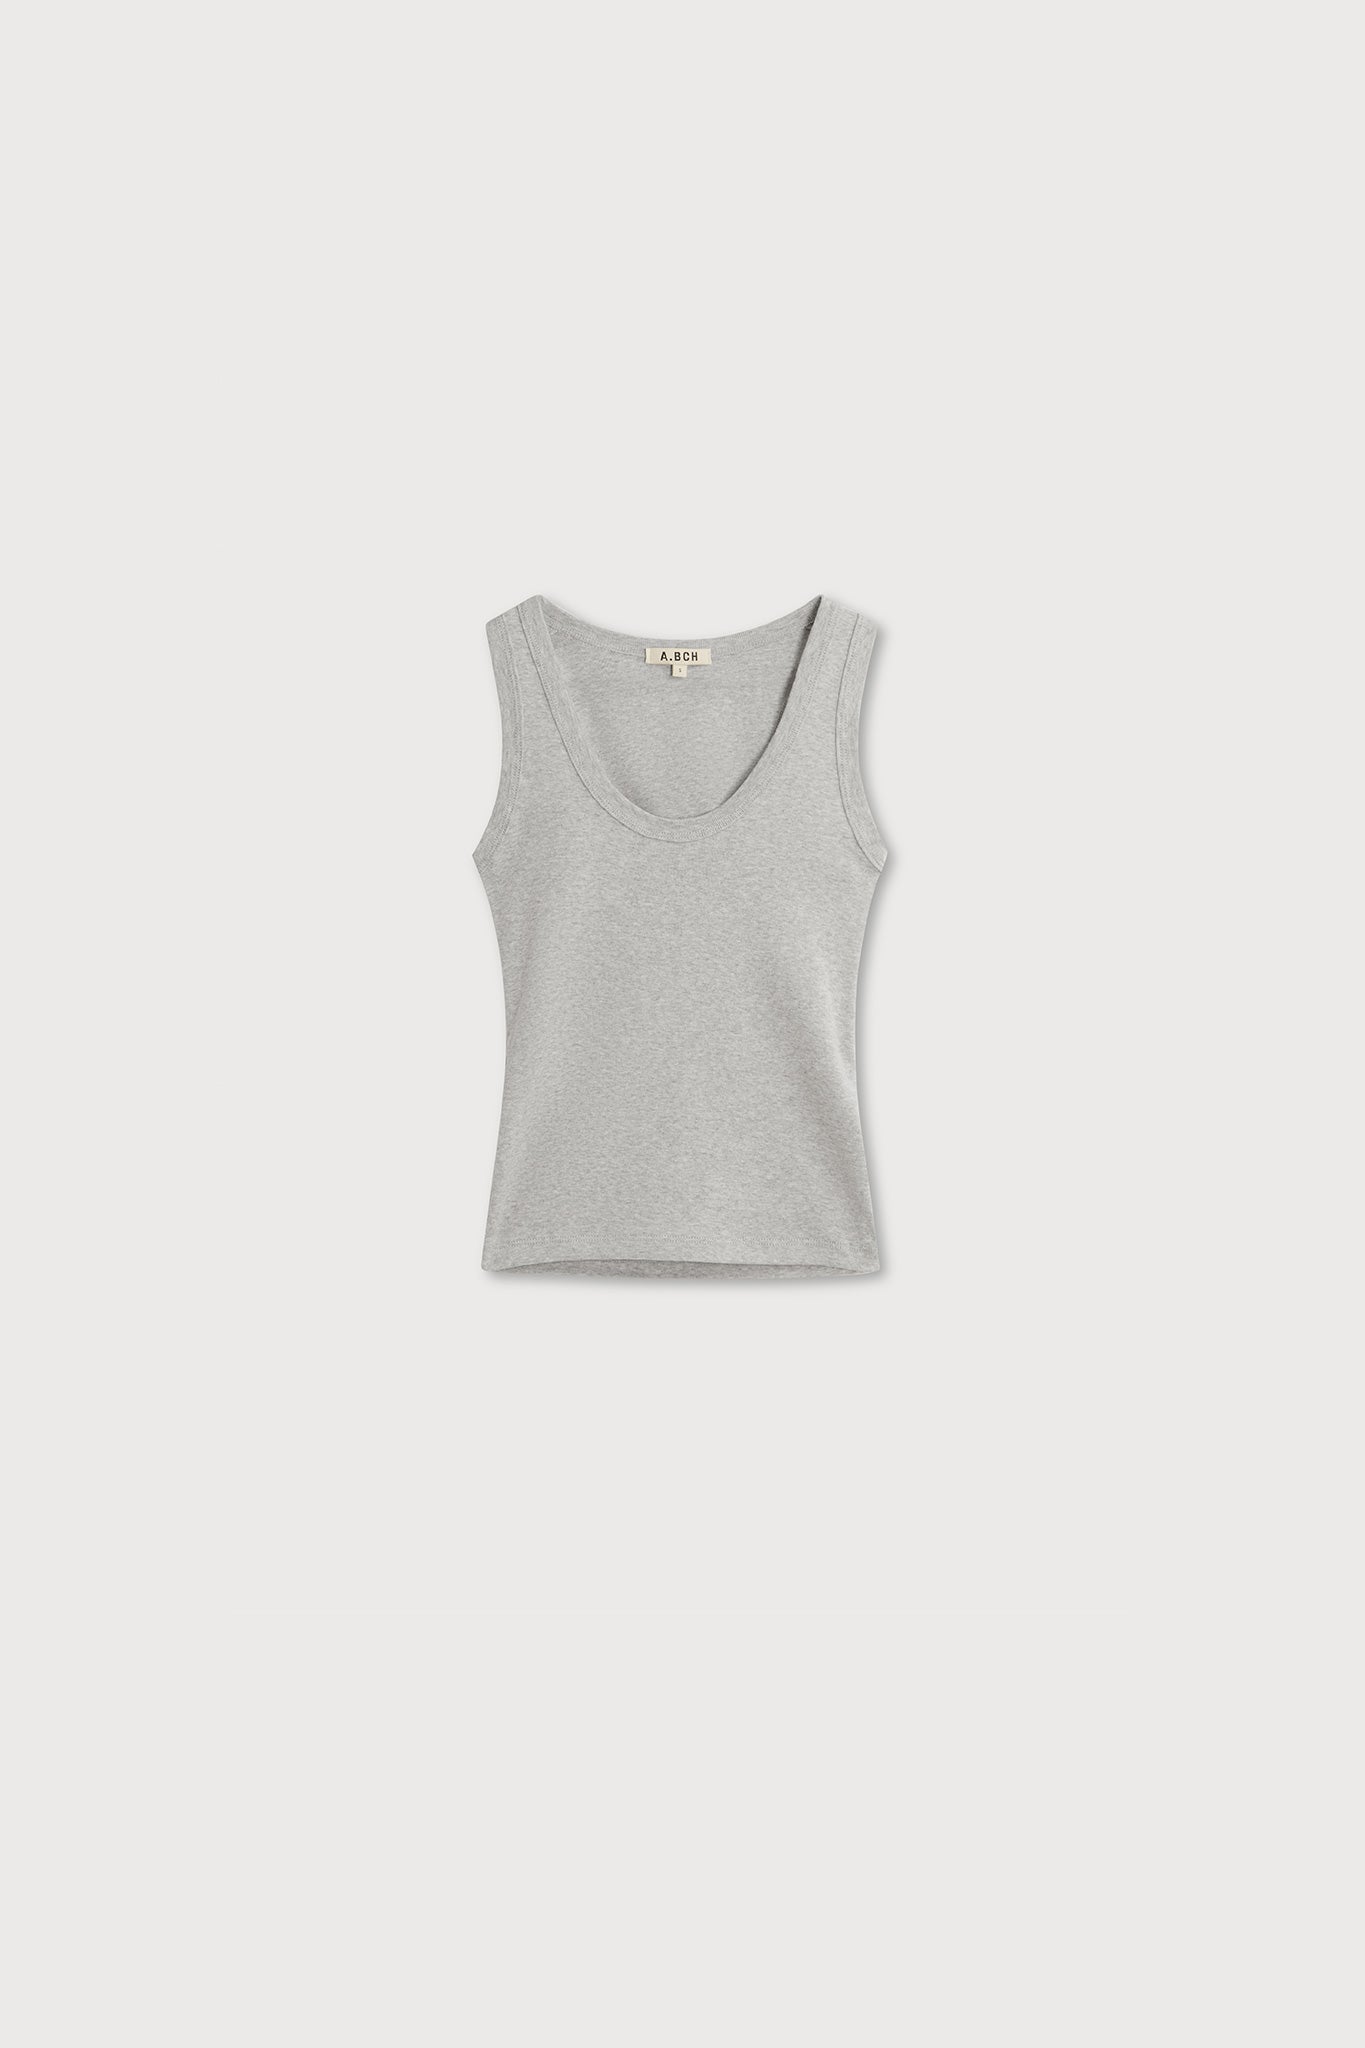 A.BCH A.44 Grey Marle Scoop Neck Rib Tank in Organic Cotton